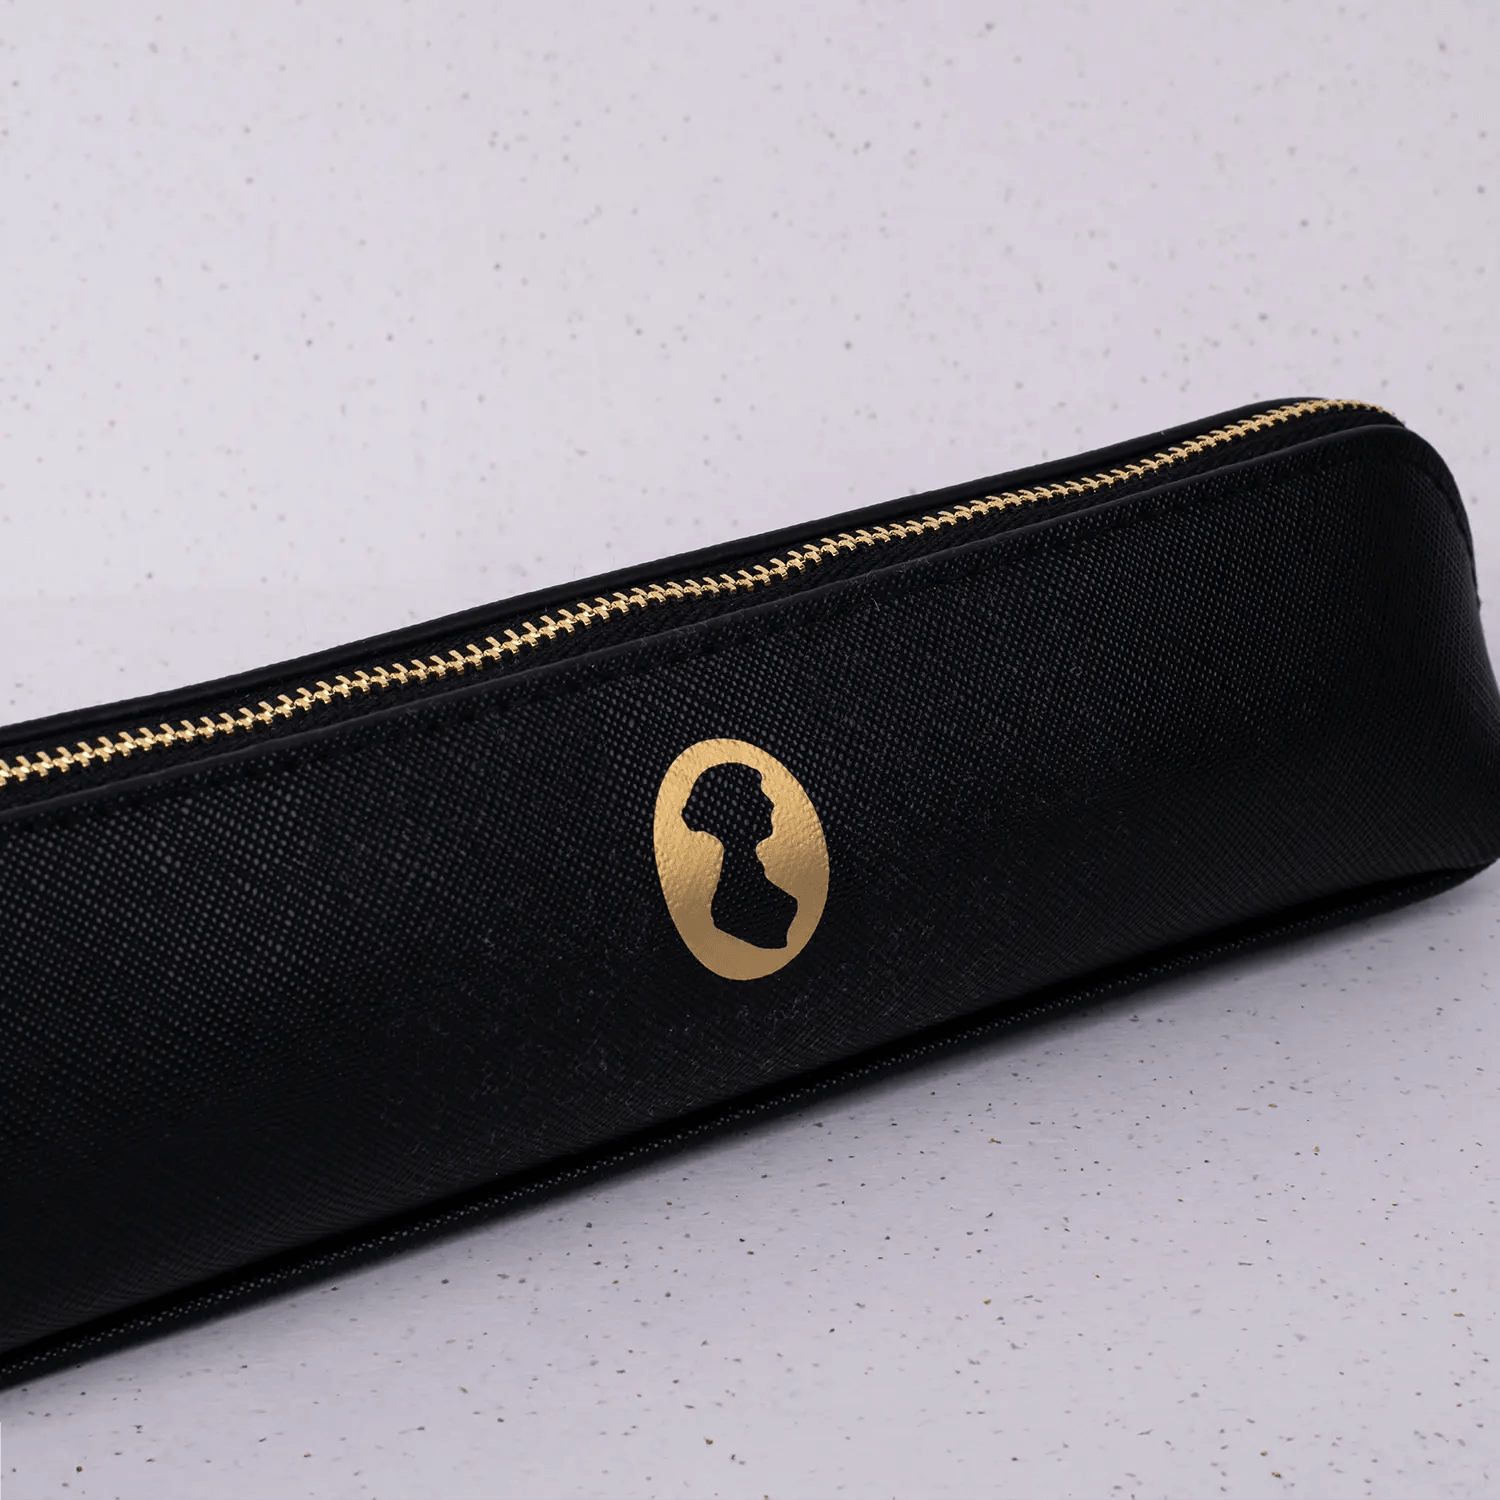 A faux leather pencil case with Jane Austen's iconic signature and silhouette. 